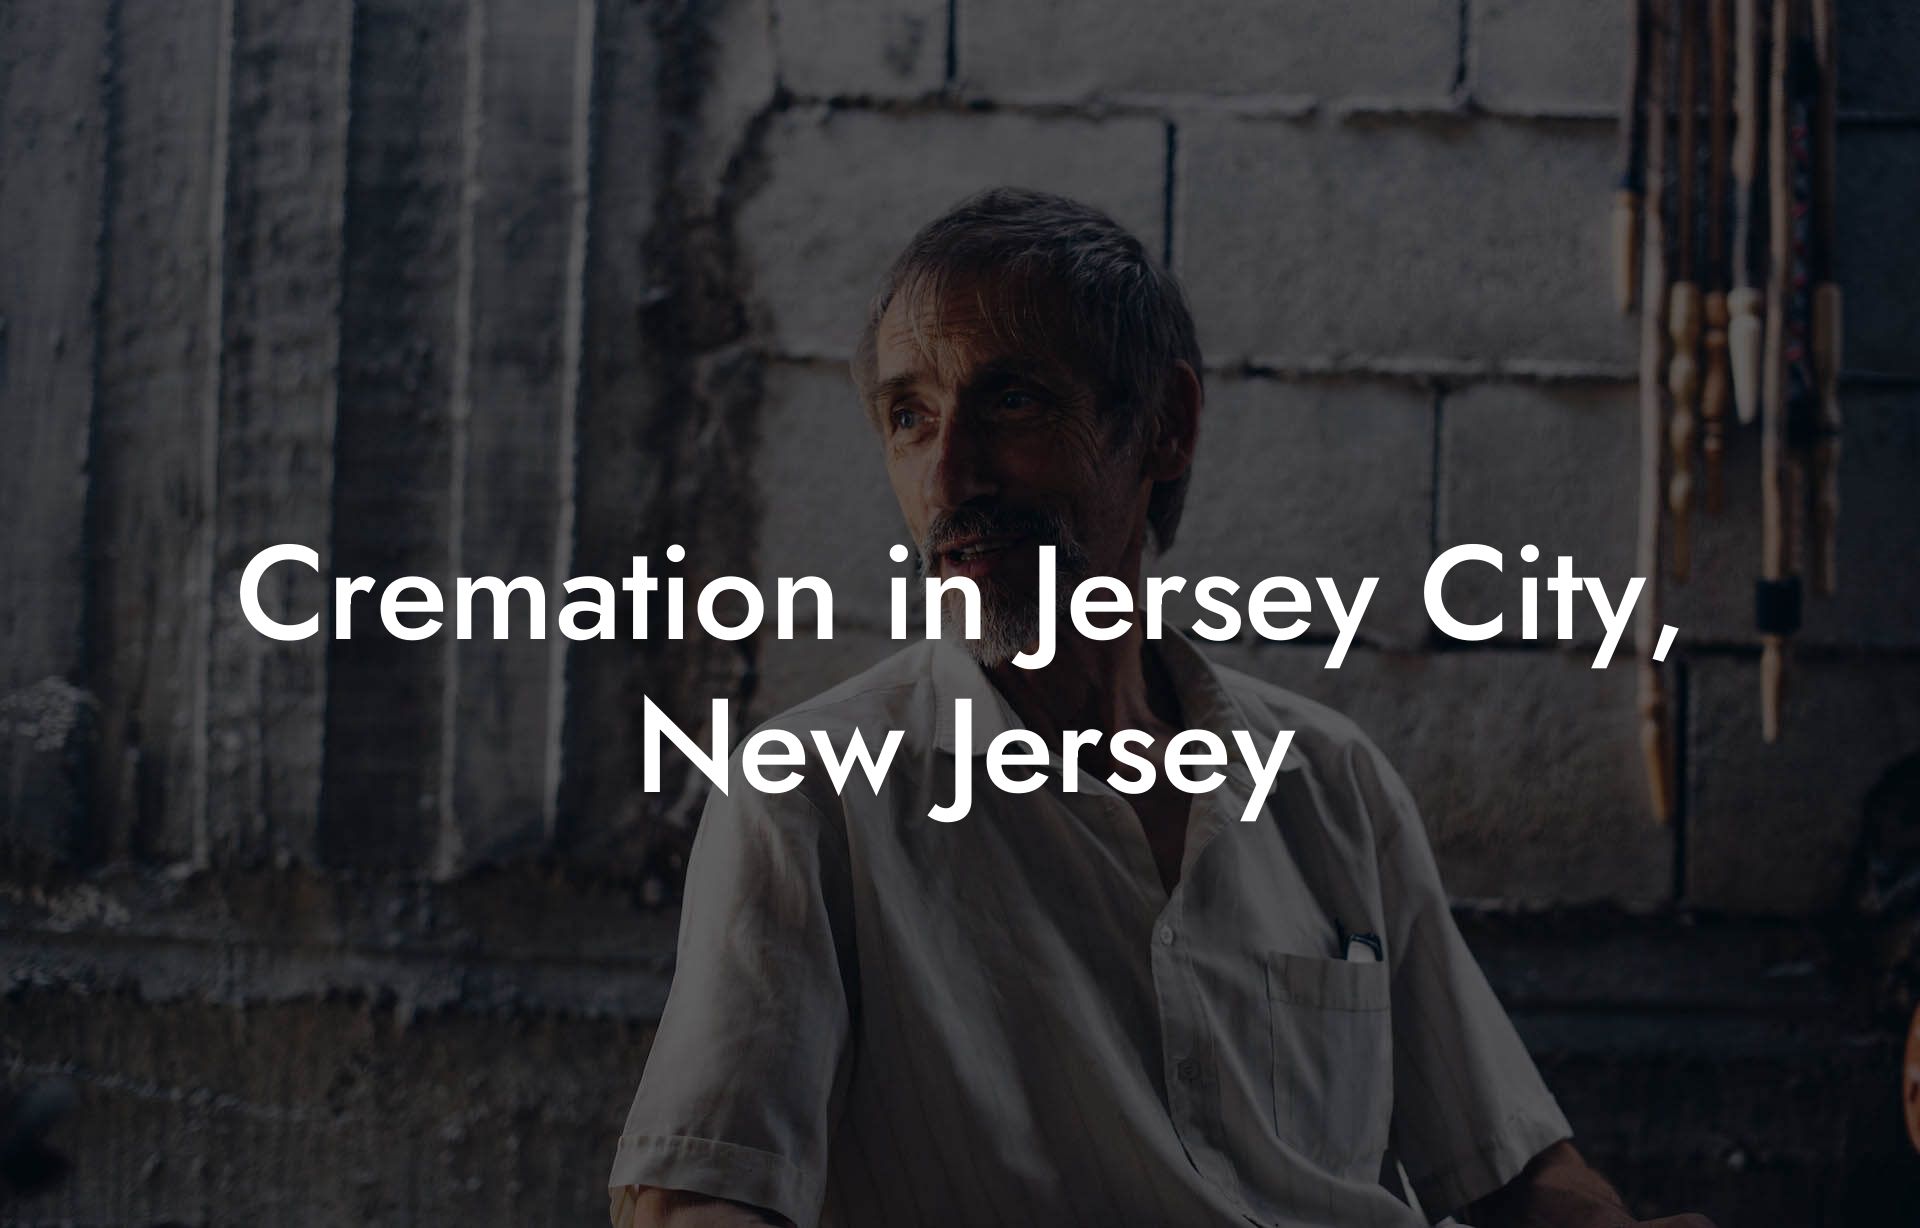 Cremation in Jersey City, New Jersey